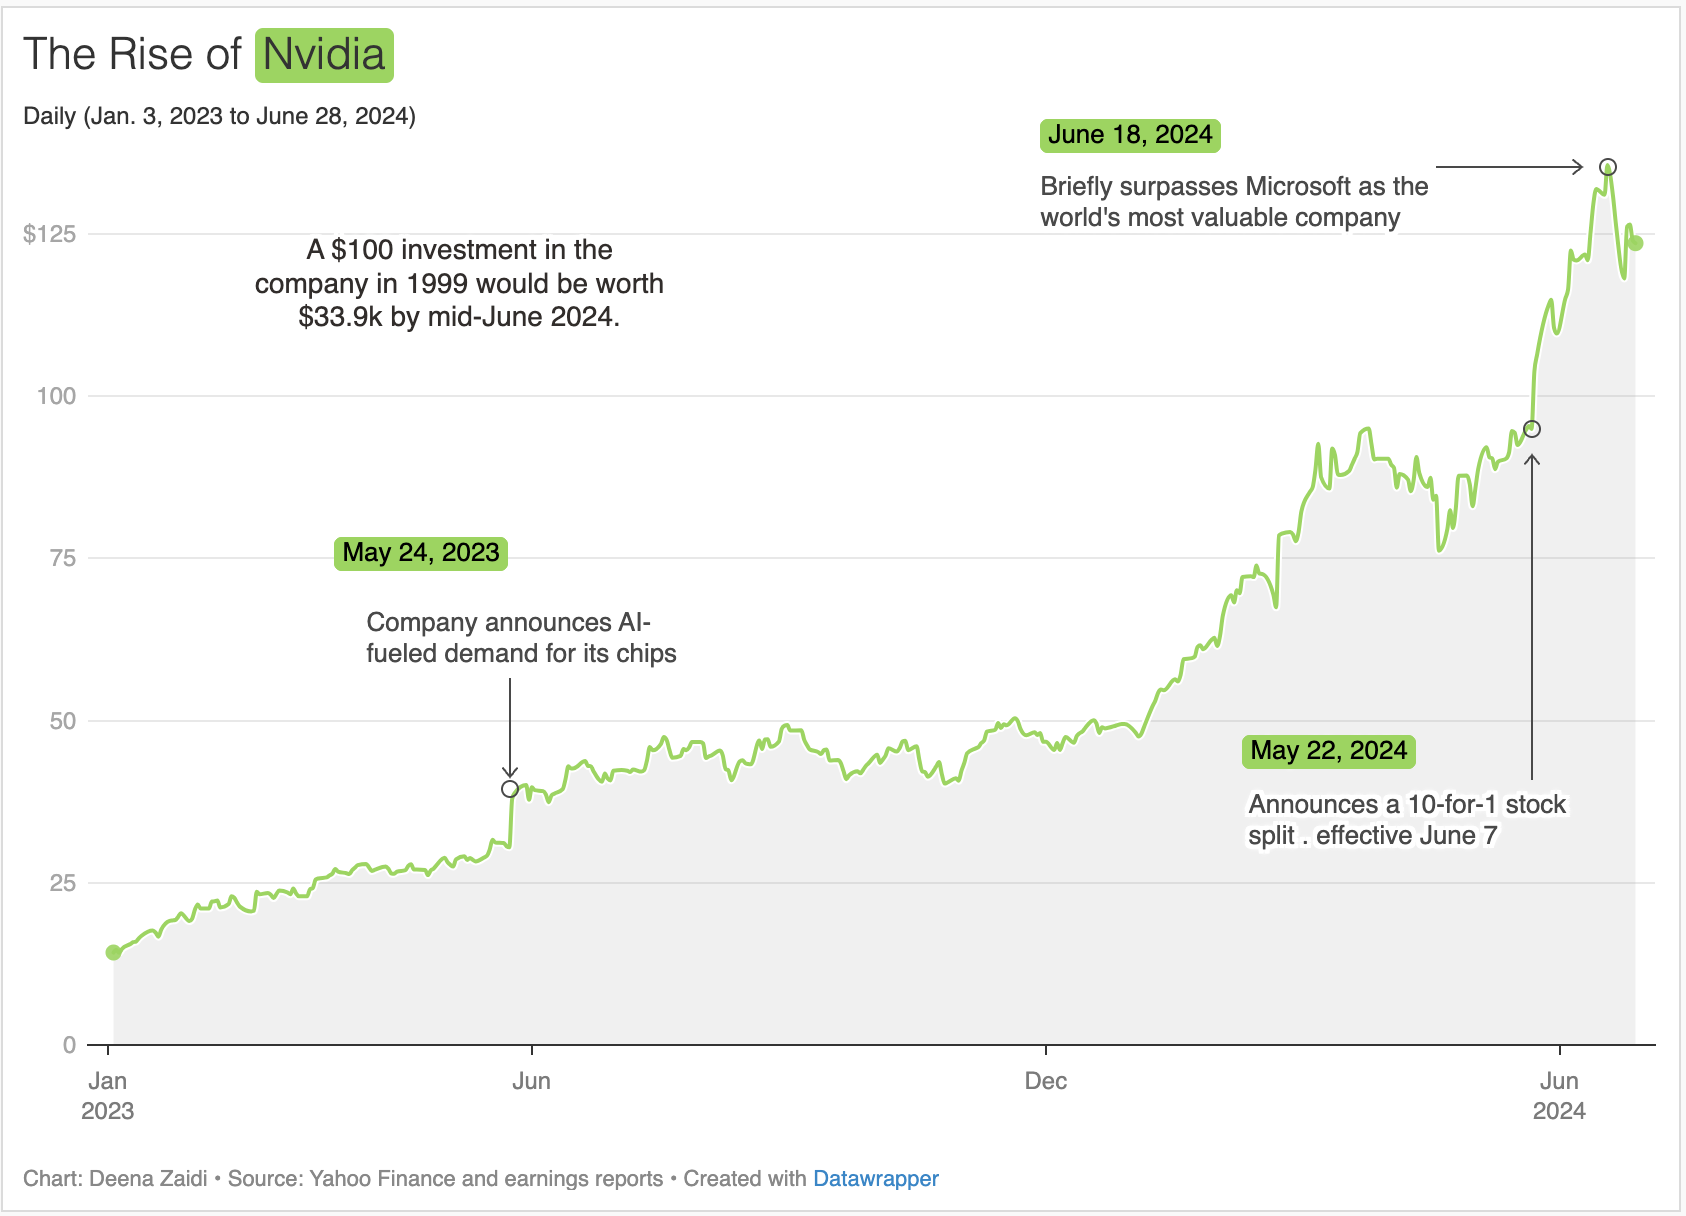 Nvidia’s Performance in 3 Charts